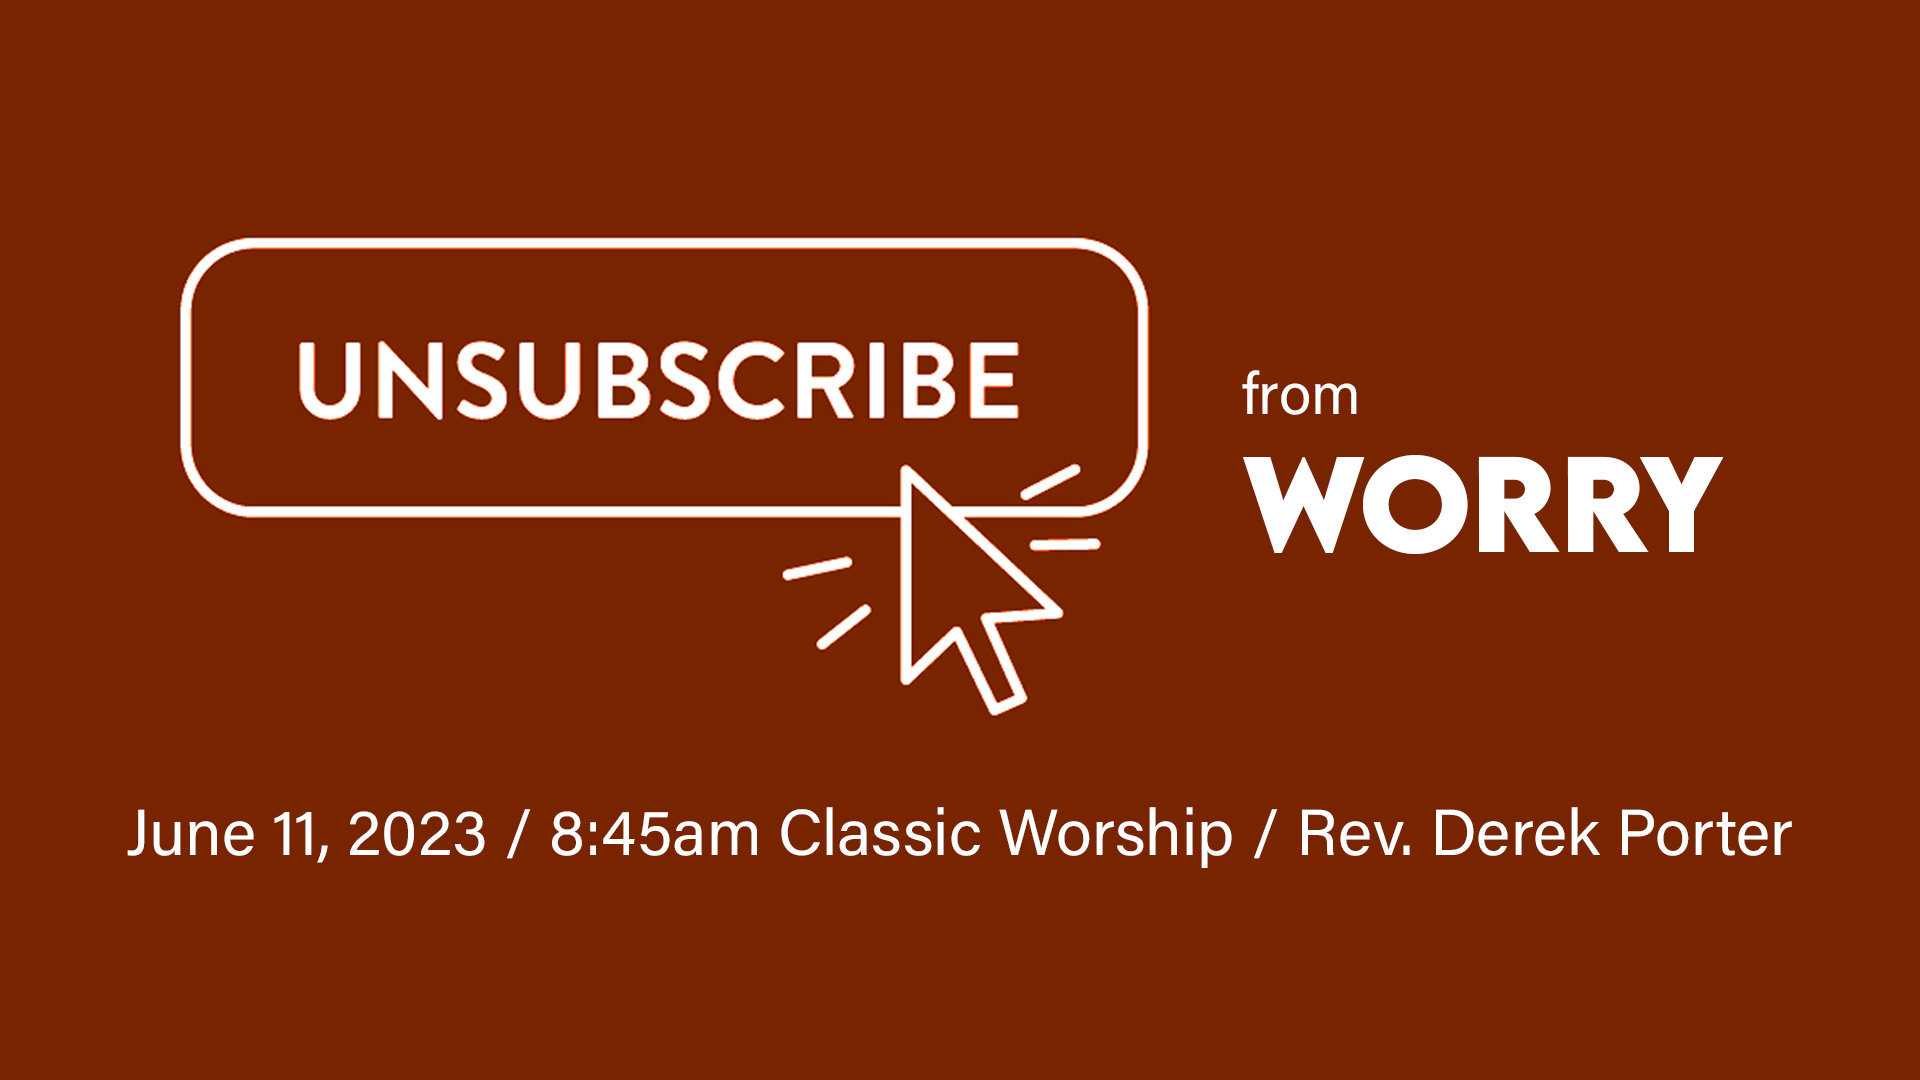 Unsubscribe from Worry